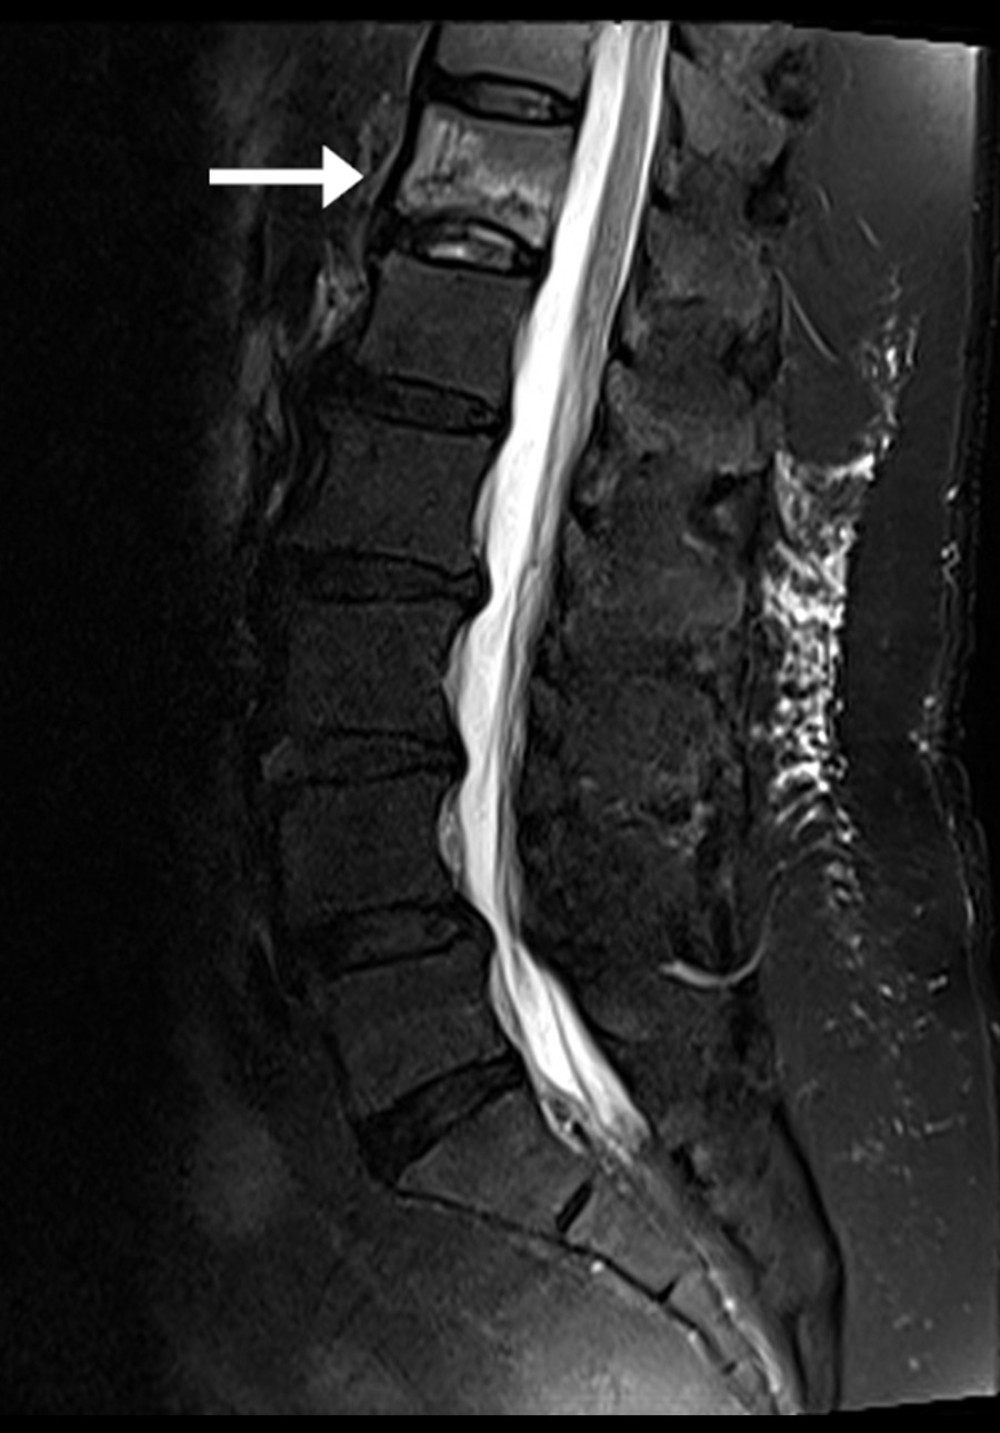 Osteoporotic compression fracture. This 72-year-old woman presented with a 1-month history of low back pain with radiation into the left paraspinal region and numbness in the left anterior thigh beginning after a fall from ground level onto her knee. She had been receiving acupuncture and traditional bonesetting therapy and had no previous imaging. The T12 vertebral body shows marrow edema and a hypointense horizontal fracture line is noted in this T2-weighted mid-sagittal image (arrow), which remains hypointense in T1-weighted images (not shown). The patient was referred to an orthopedist but was ultimately treated conservatively. Arrow added by RT using GNU Image Manipulation Program (Version 2.10.30).